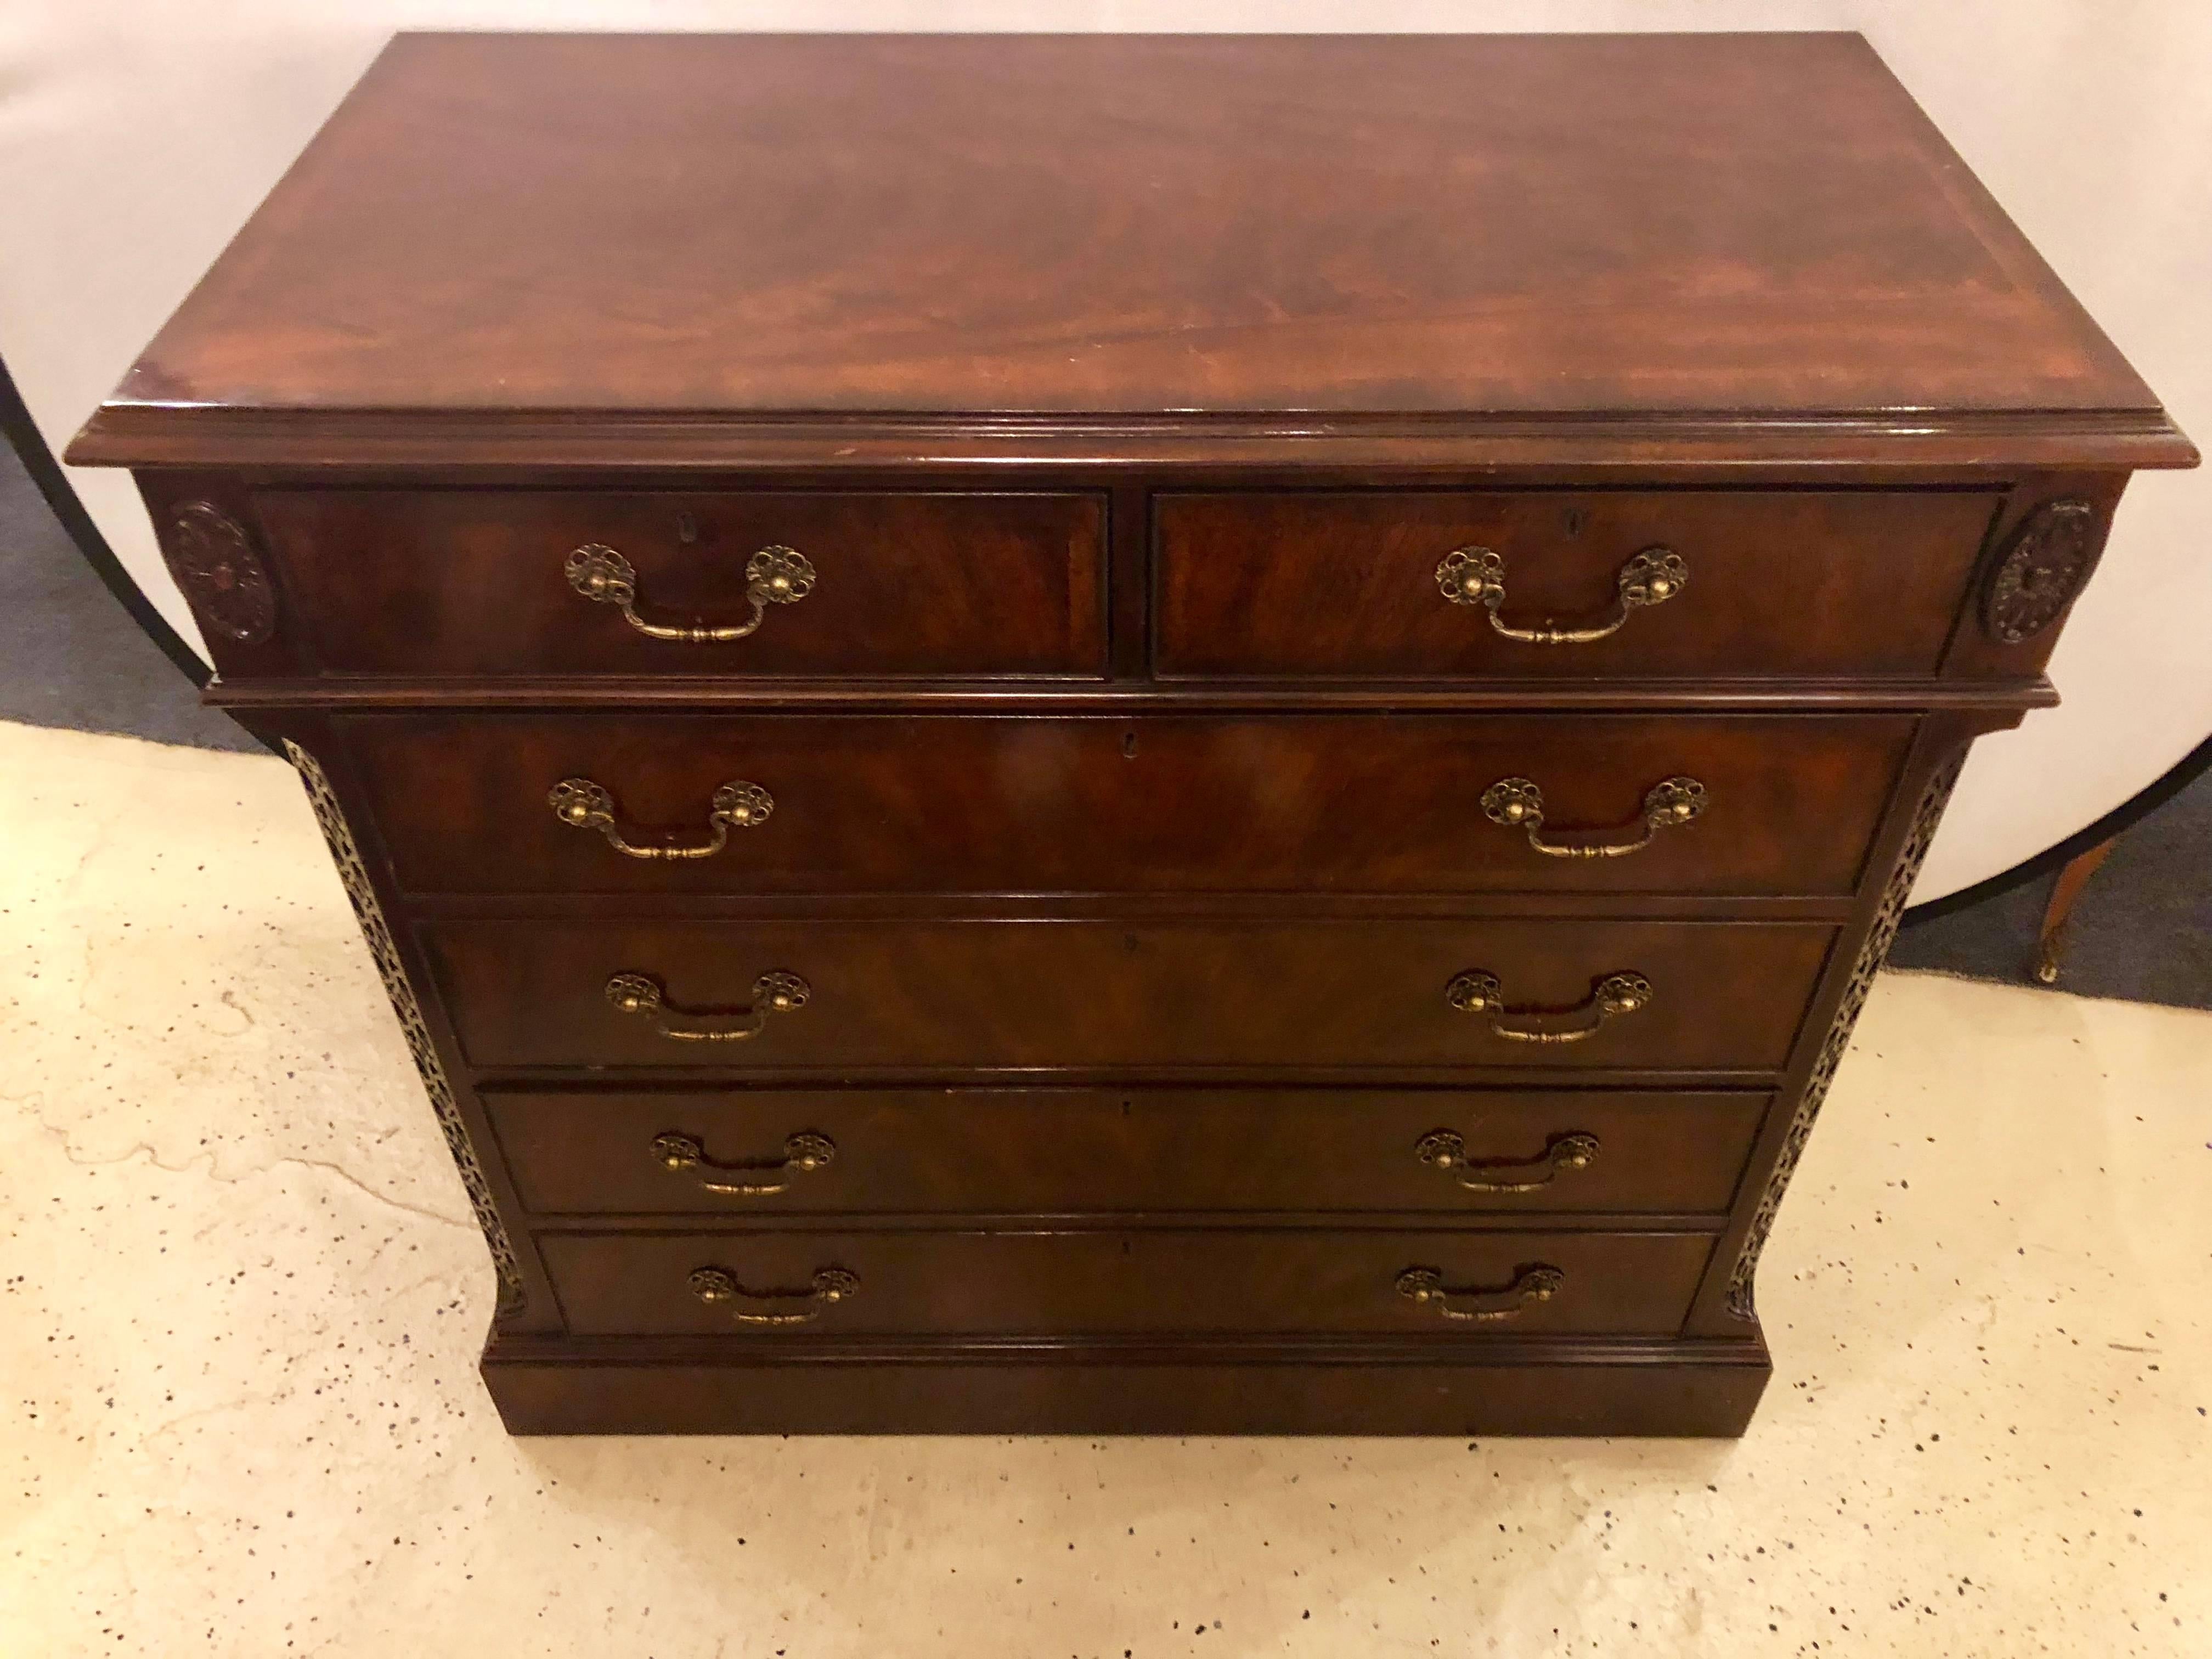 A fine flame mahogany double file cabinet credenza having oak secondaries. This fine chest of drawers is certain to add glamour to any home or office setting. Having two upper drawers and two lower file cabinet drawers all with oak secondary woods